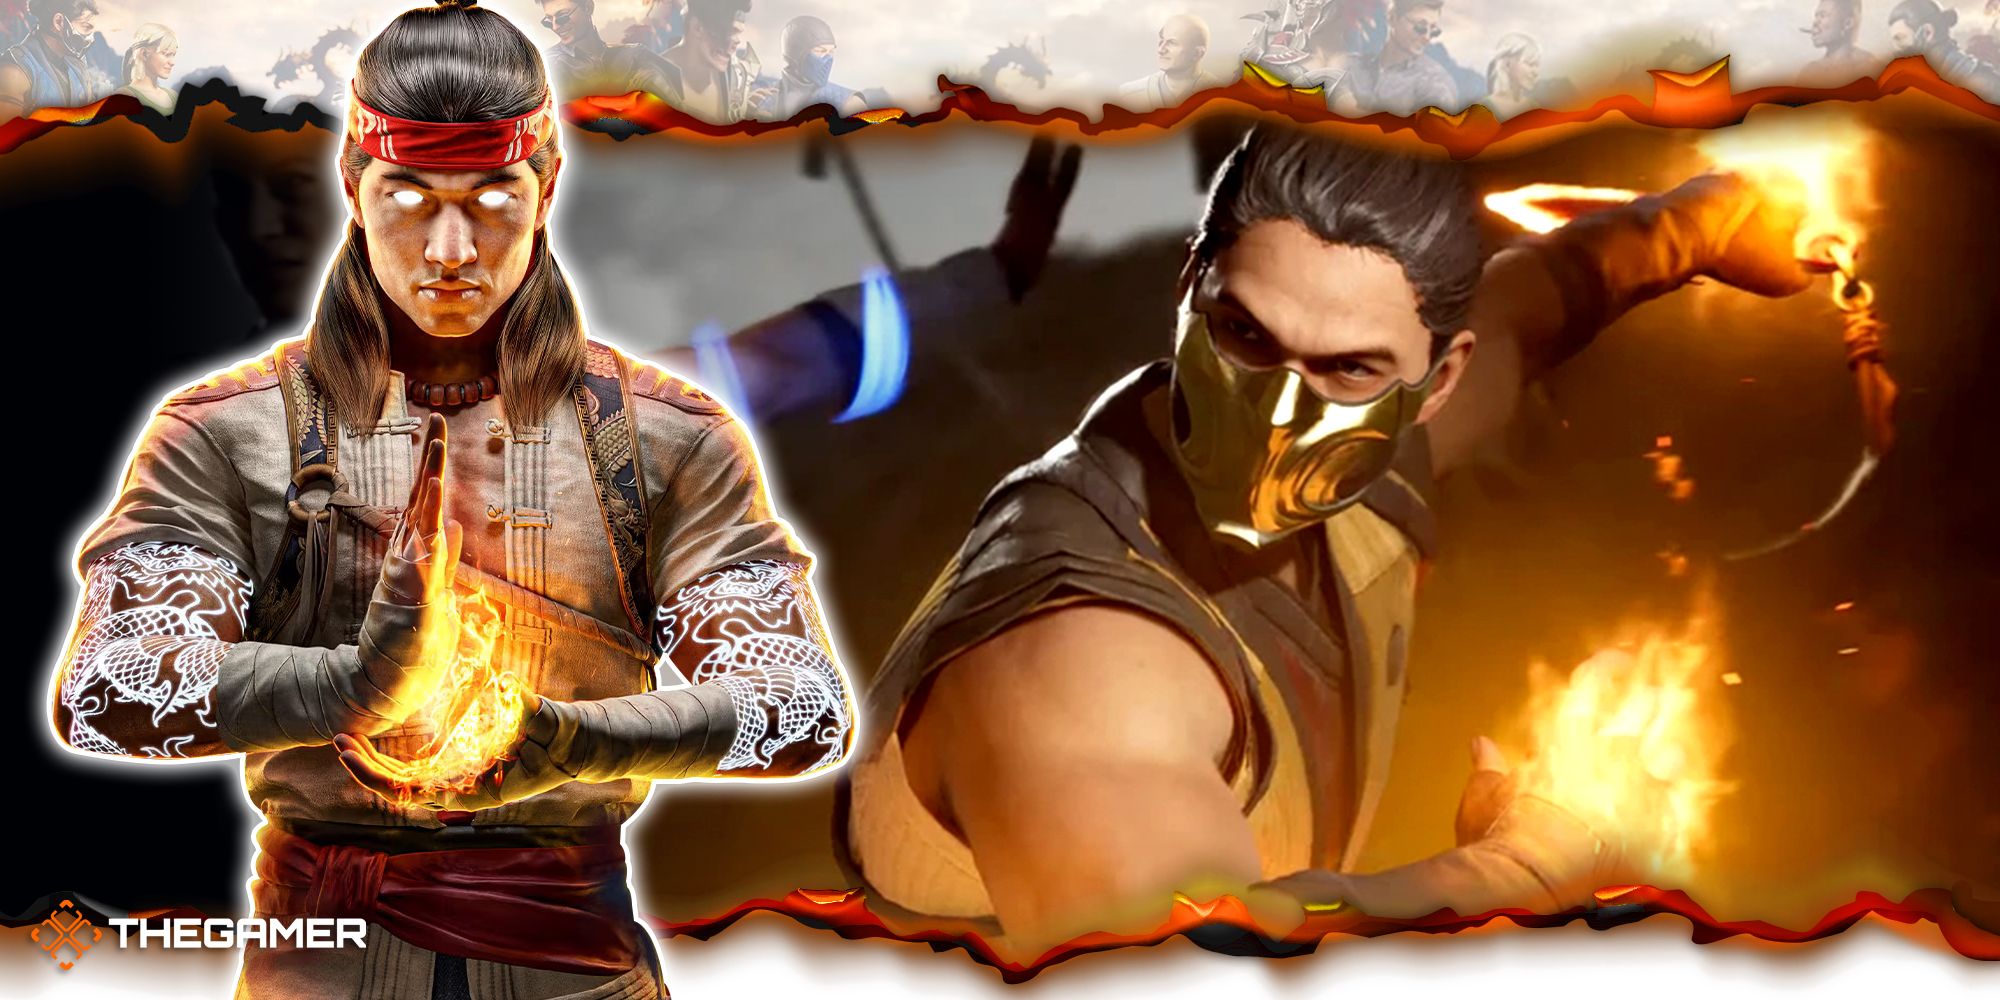 Get over here! Mortal Kombat 1 is ALREADY on sale thanks to this deal